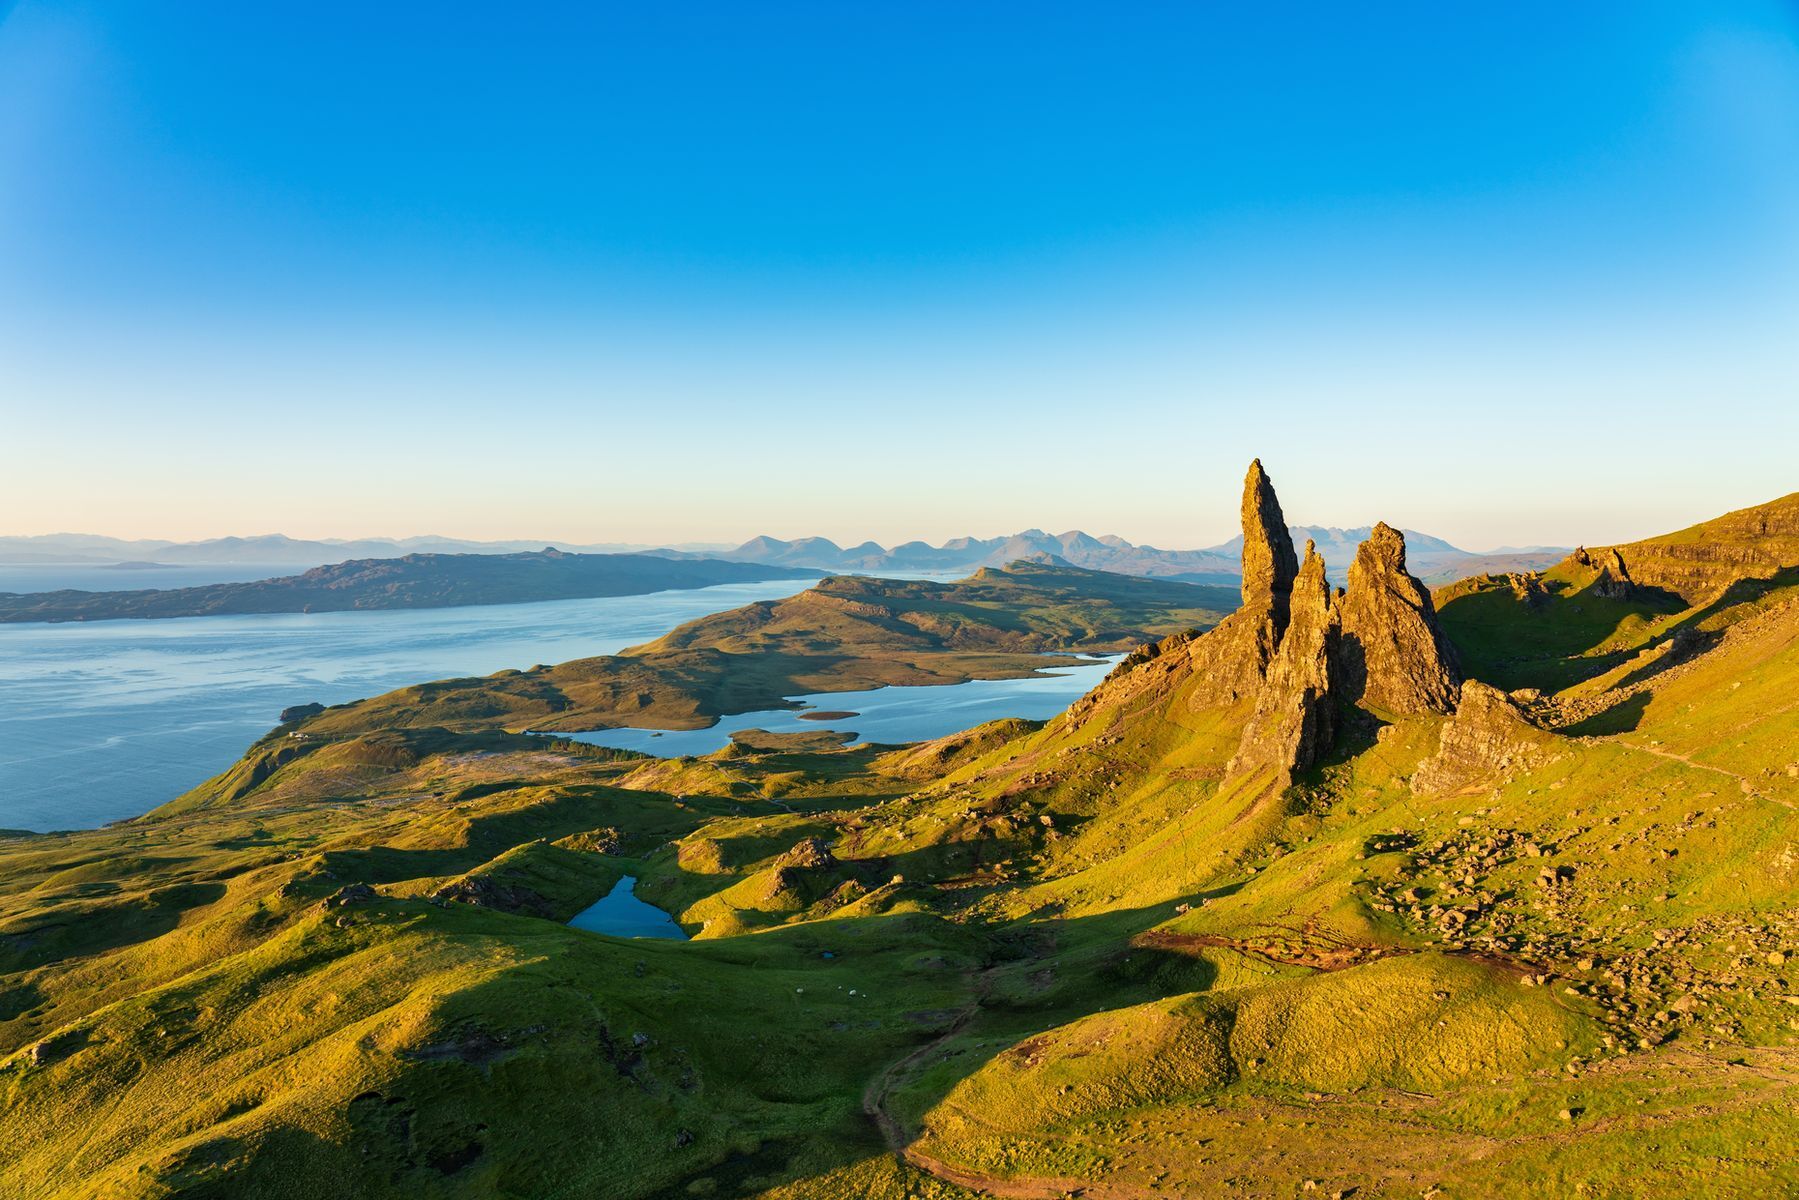 <p>The <a href="https://www.visitscotland.com/info/towns-villages/skye-p245091" class="CMY_Link CMY_Valid" rel="noreferrer noopener">Isle of Skye</a>, one of Scotland’s Inner Hebrides, seems straight out of a fairy tale. The spectacular Quiraing cliffs and lush green valleys will charm nature lovers, while the Dunvegan and Eilean Donan castles are sure to delight history buffs. Also visit the Fairy Pools, magical waters of Sligachan, Cuillin Mountains, and Kilt Rock for breathtaking views of nature.</p>